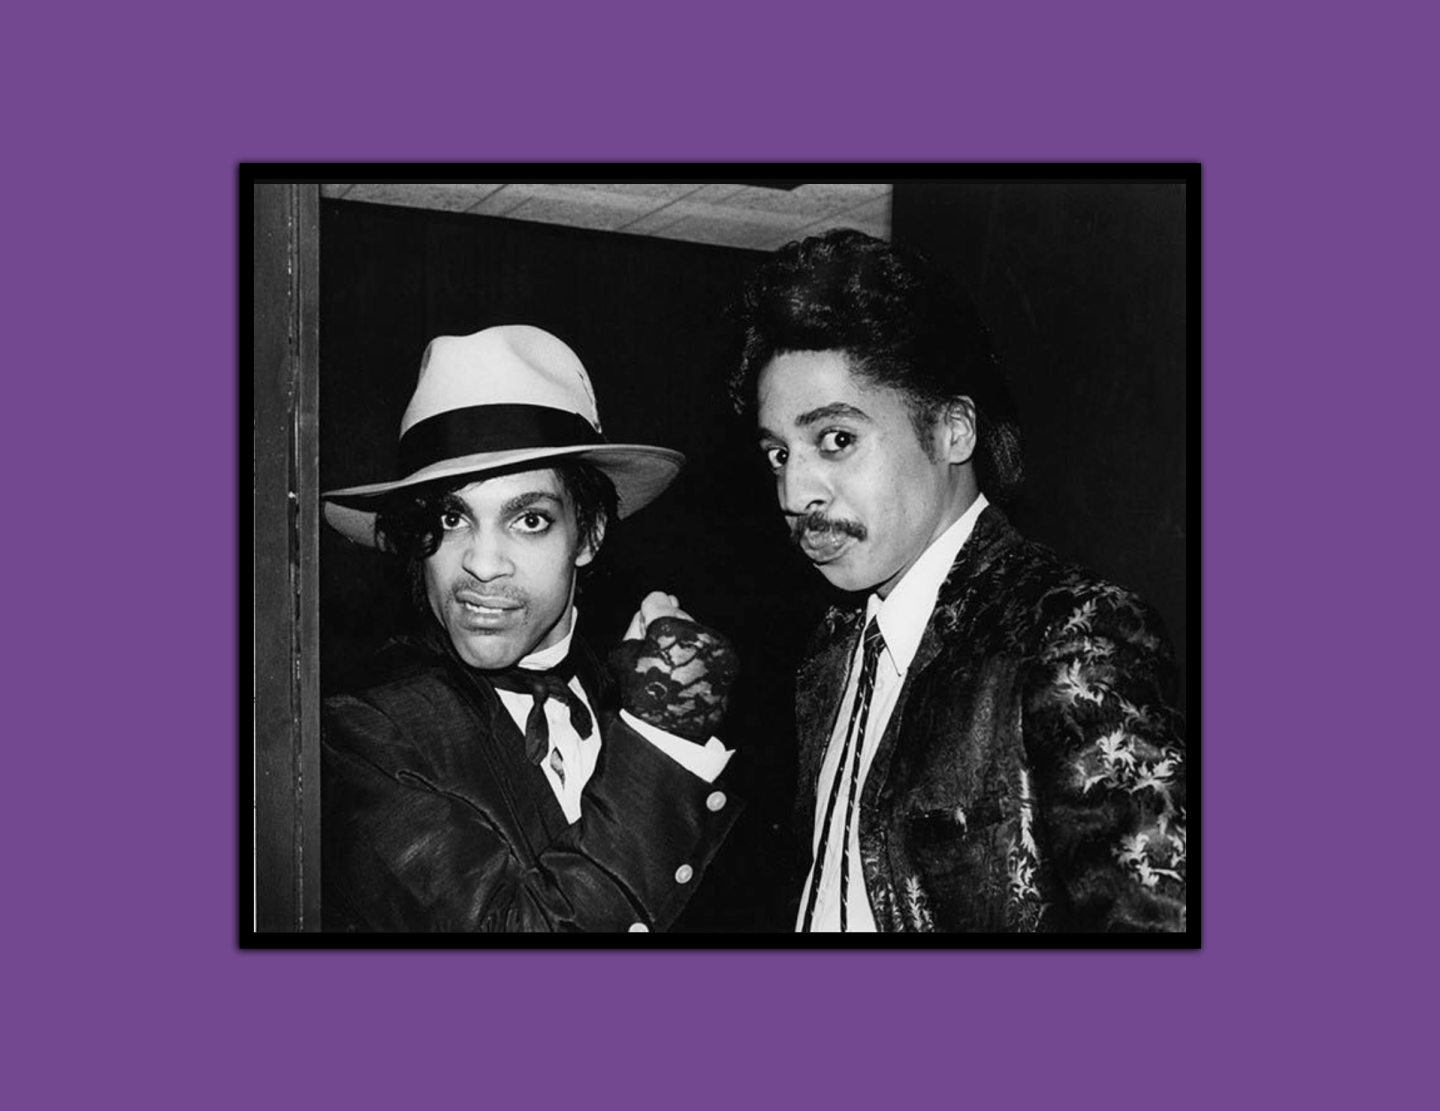 Morris Day, Prince’s Childhood Friend And Collaborator, Reflects On His Death